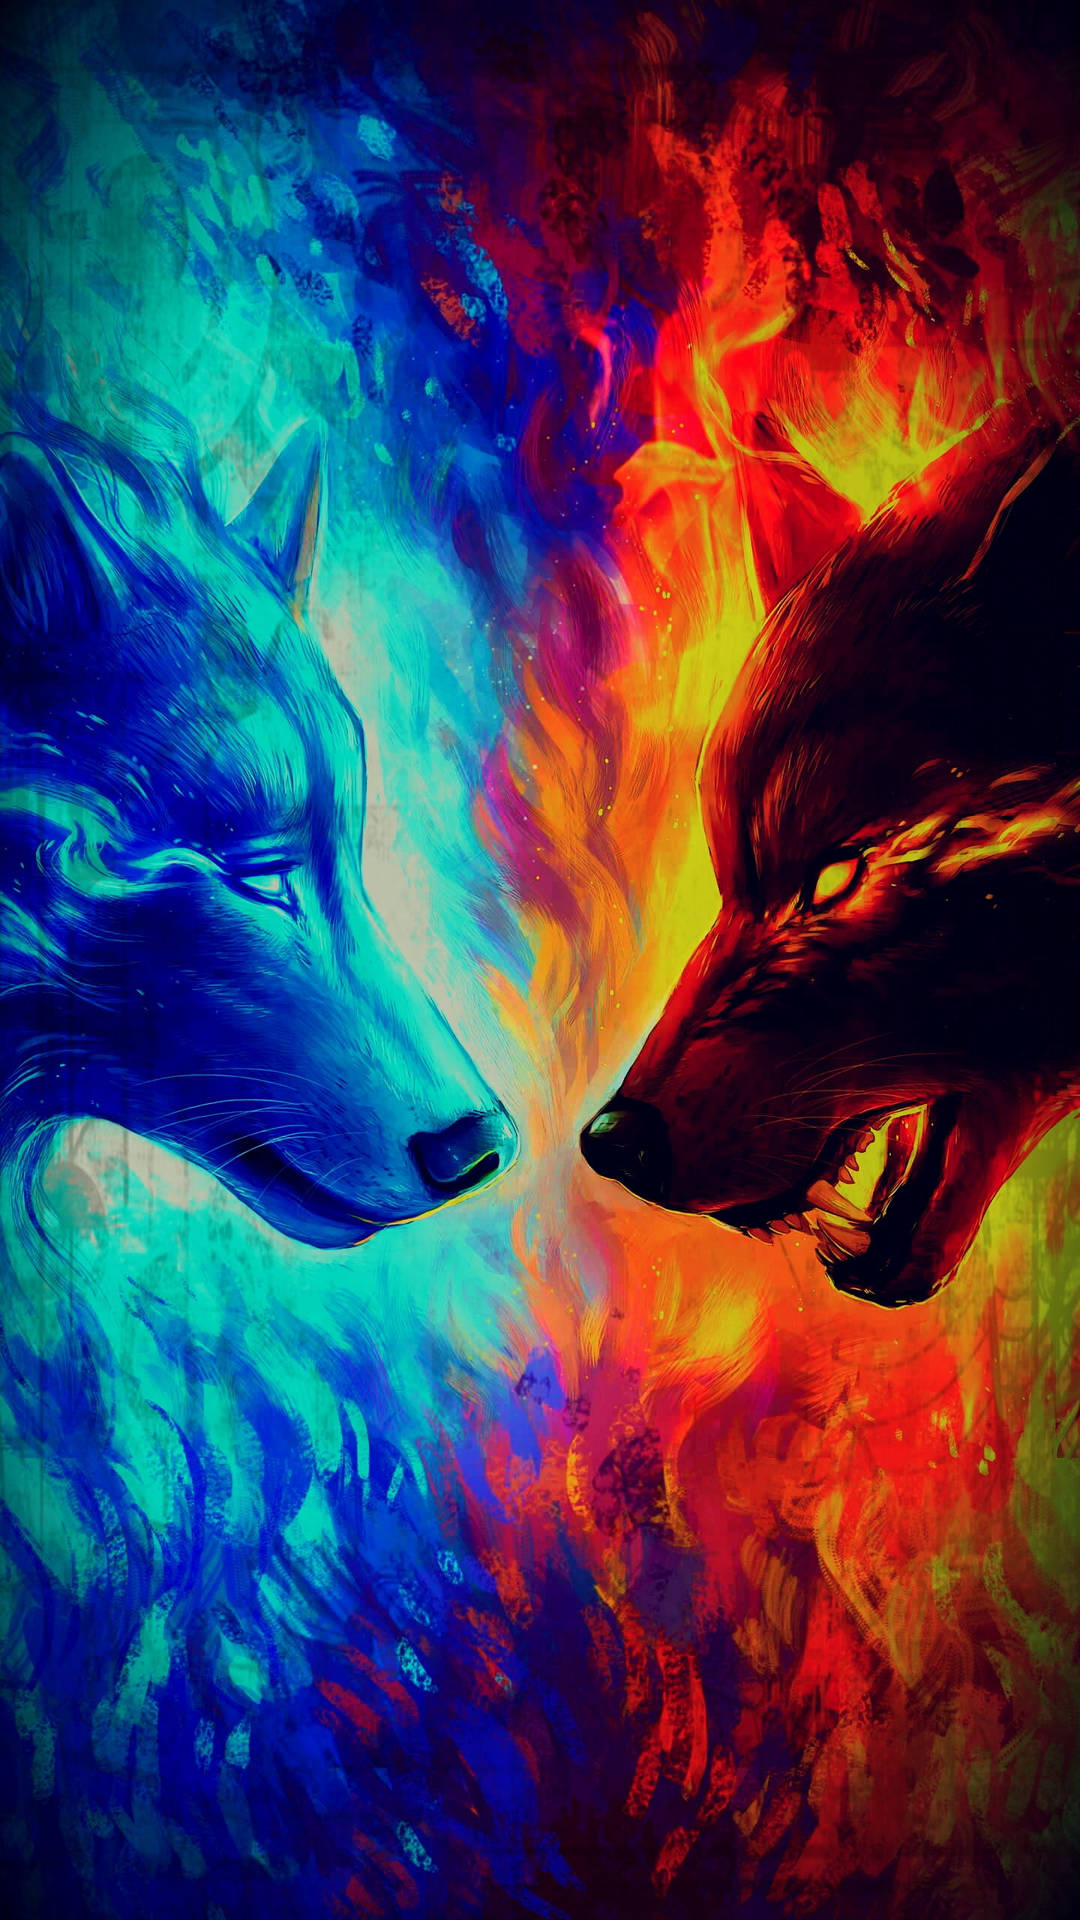 Fire And Ice Wolf Iphone Wallpaper